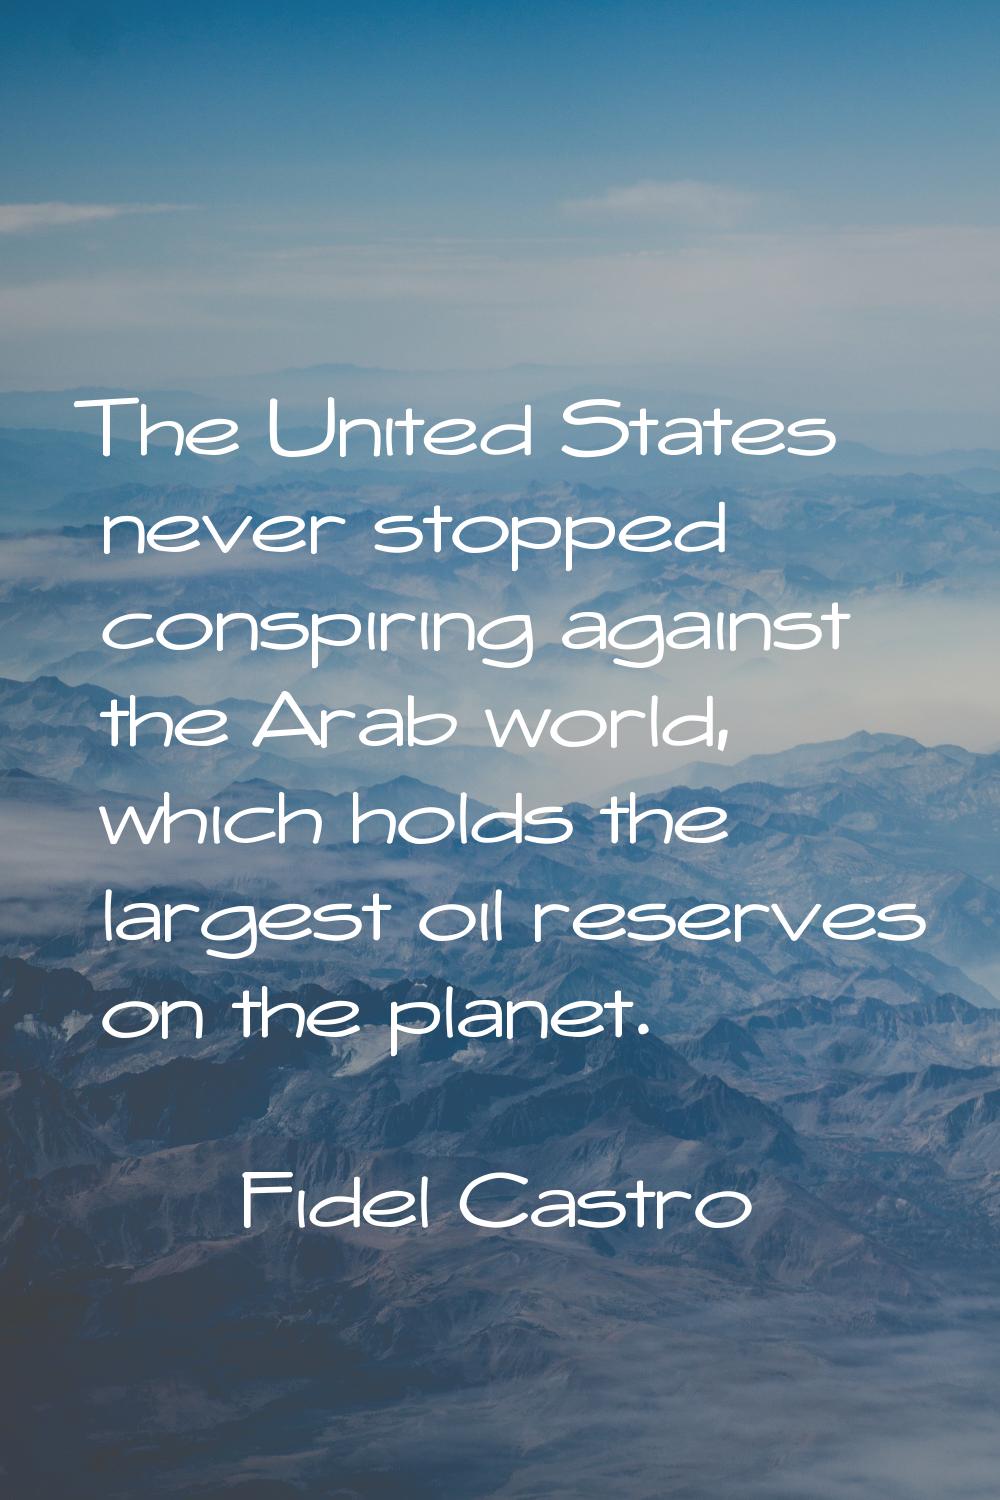 The United States never stopped conspiring against the Arab world, which holds the largest oil rese